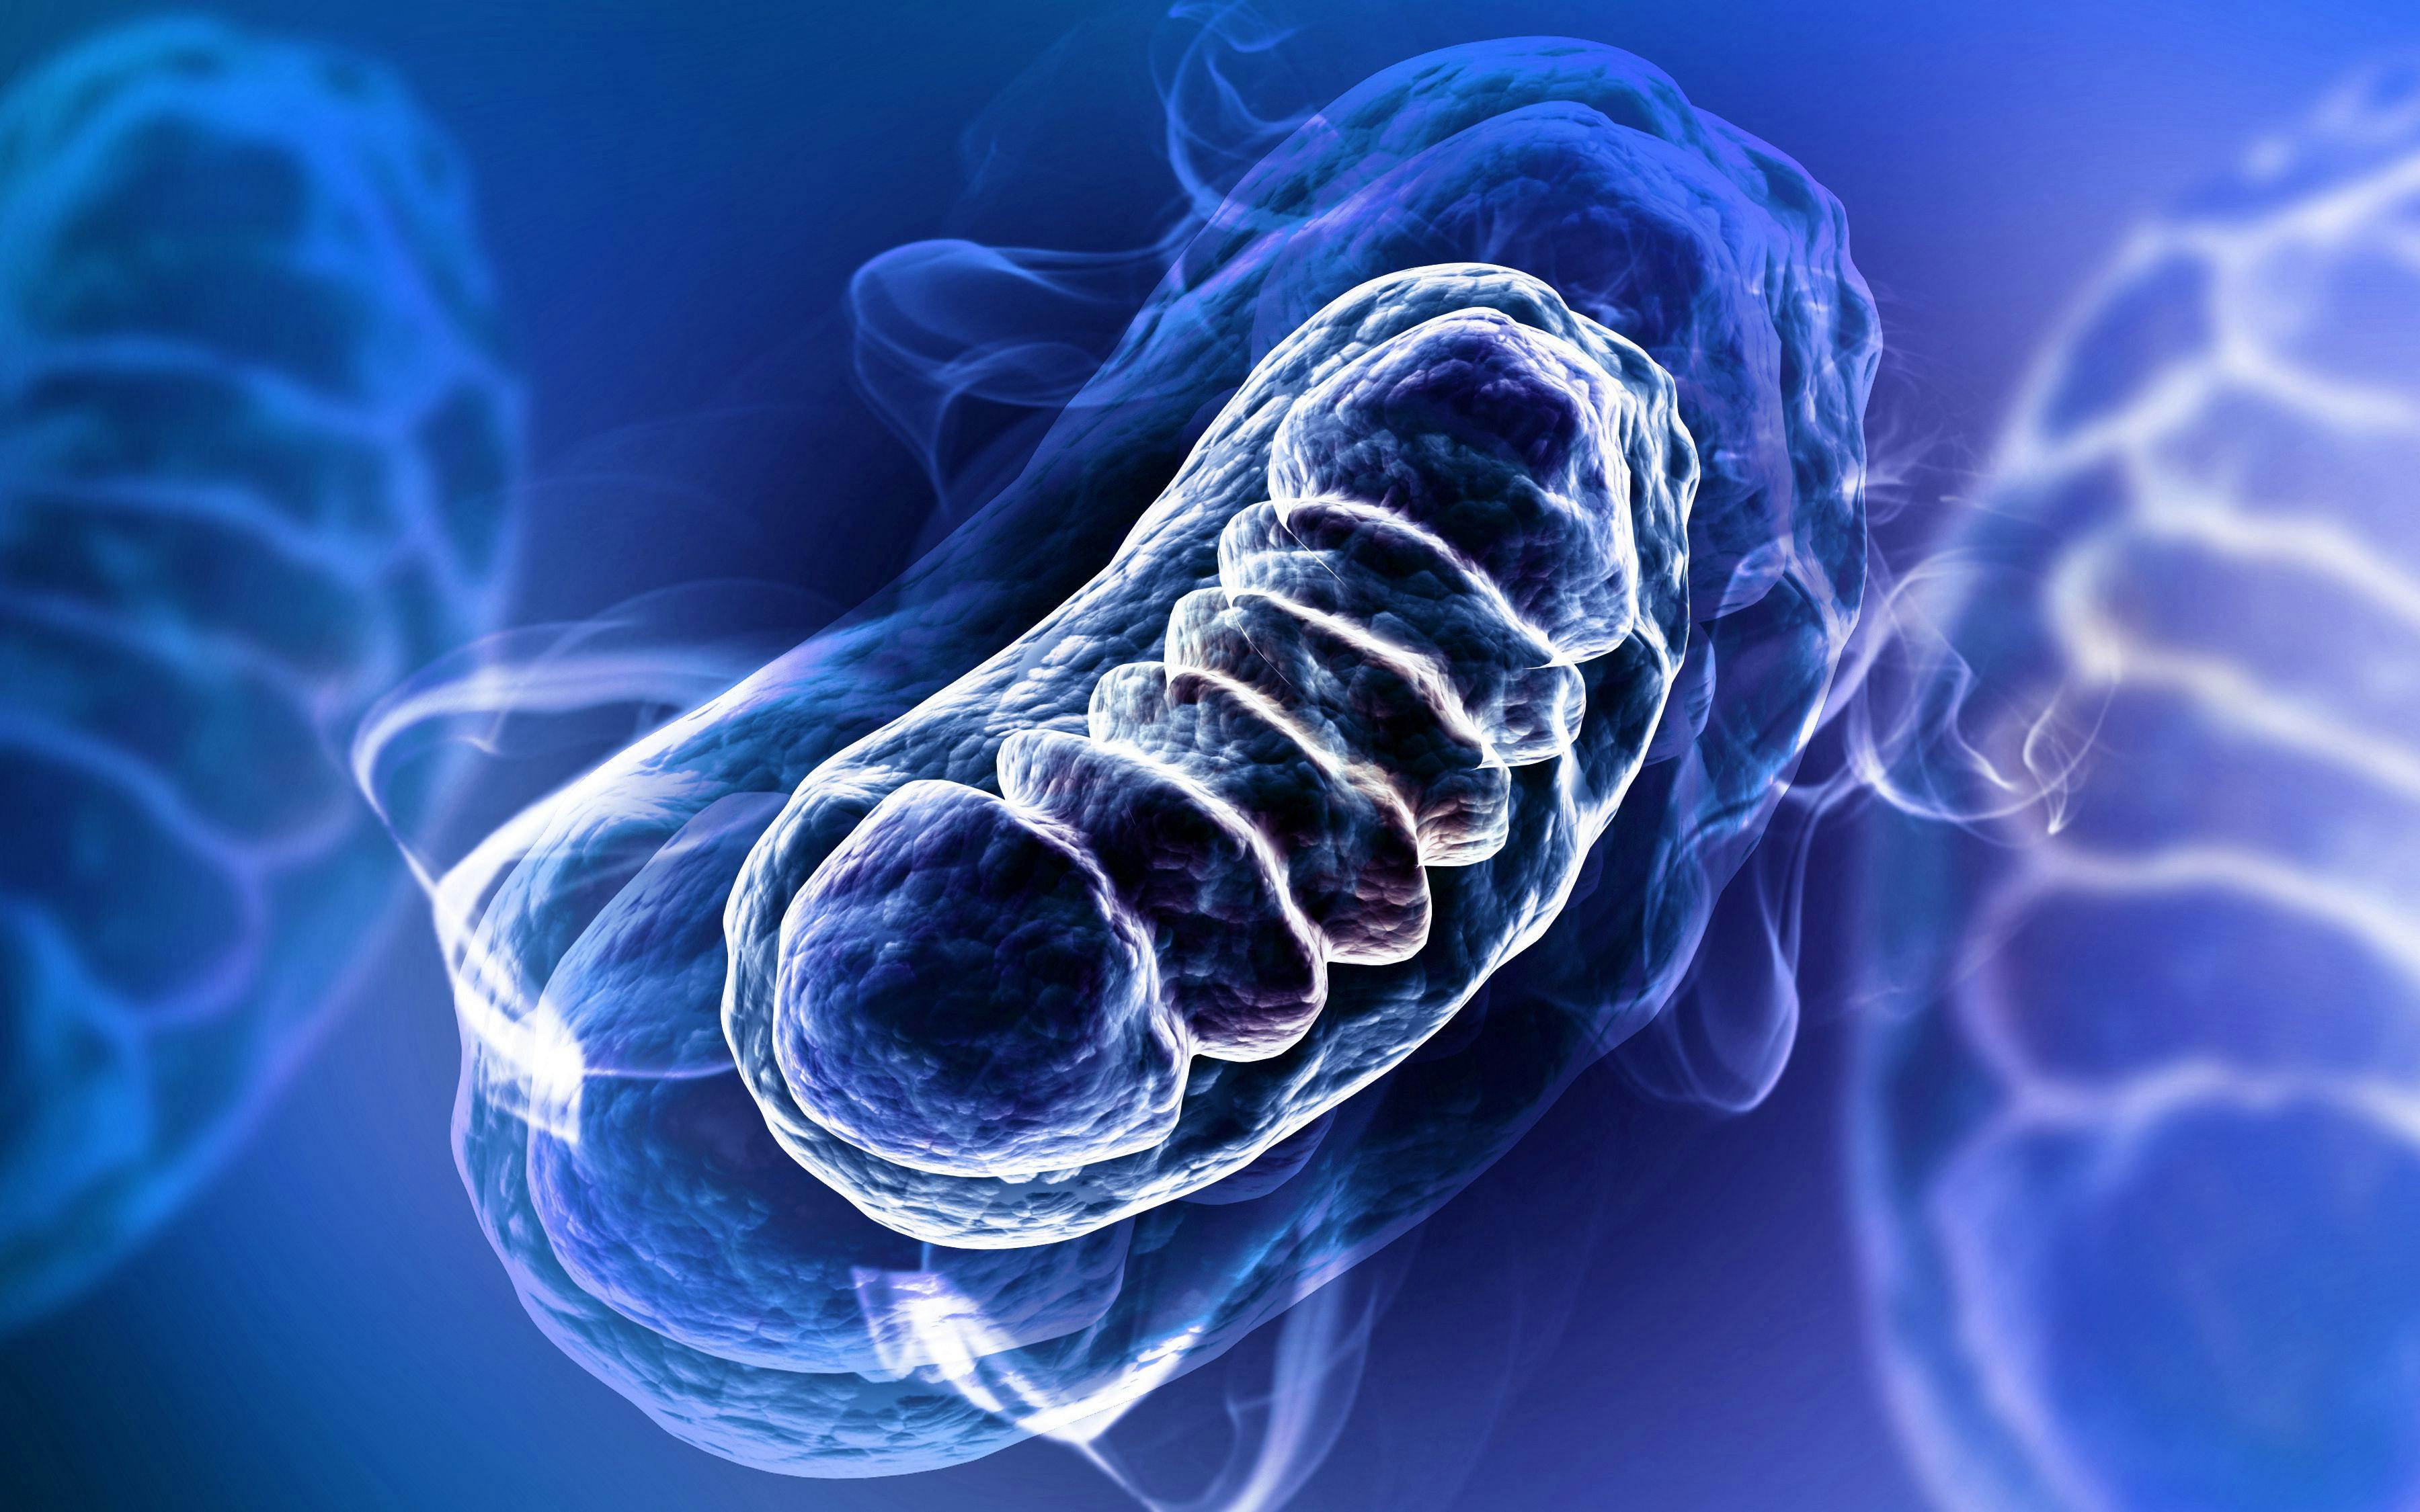 3d rendered Digital illustration of Mitochondria in colour background | Image Credit: © RAJCREATIONZS - stock.adobe.com